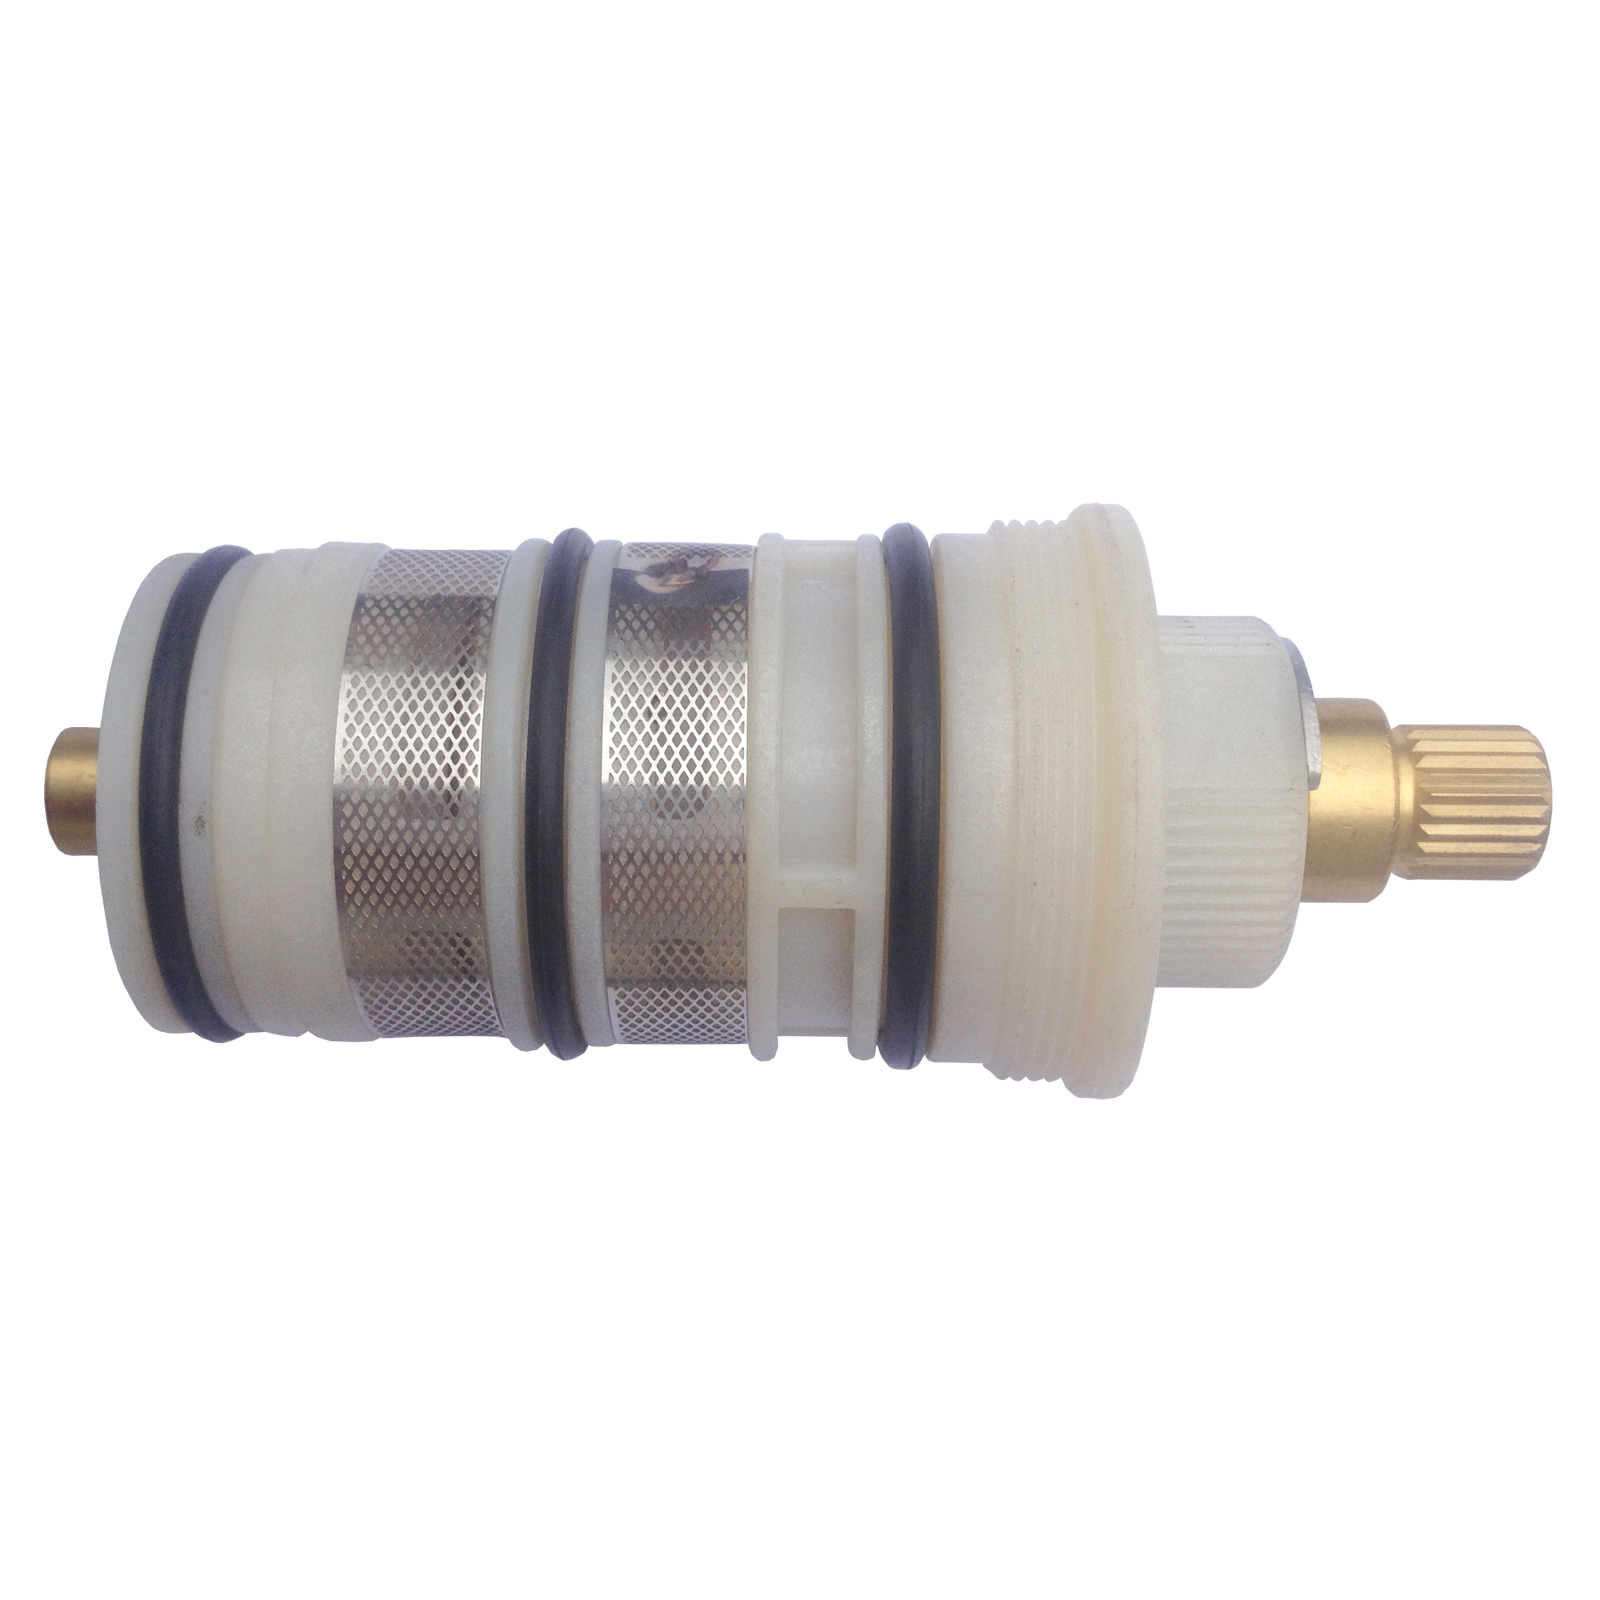 Spare Thermostatic Cartridge (Screw Fit) for WT2024SF - WT2025SF - WT2027SF- WT2028SF